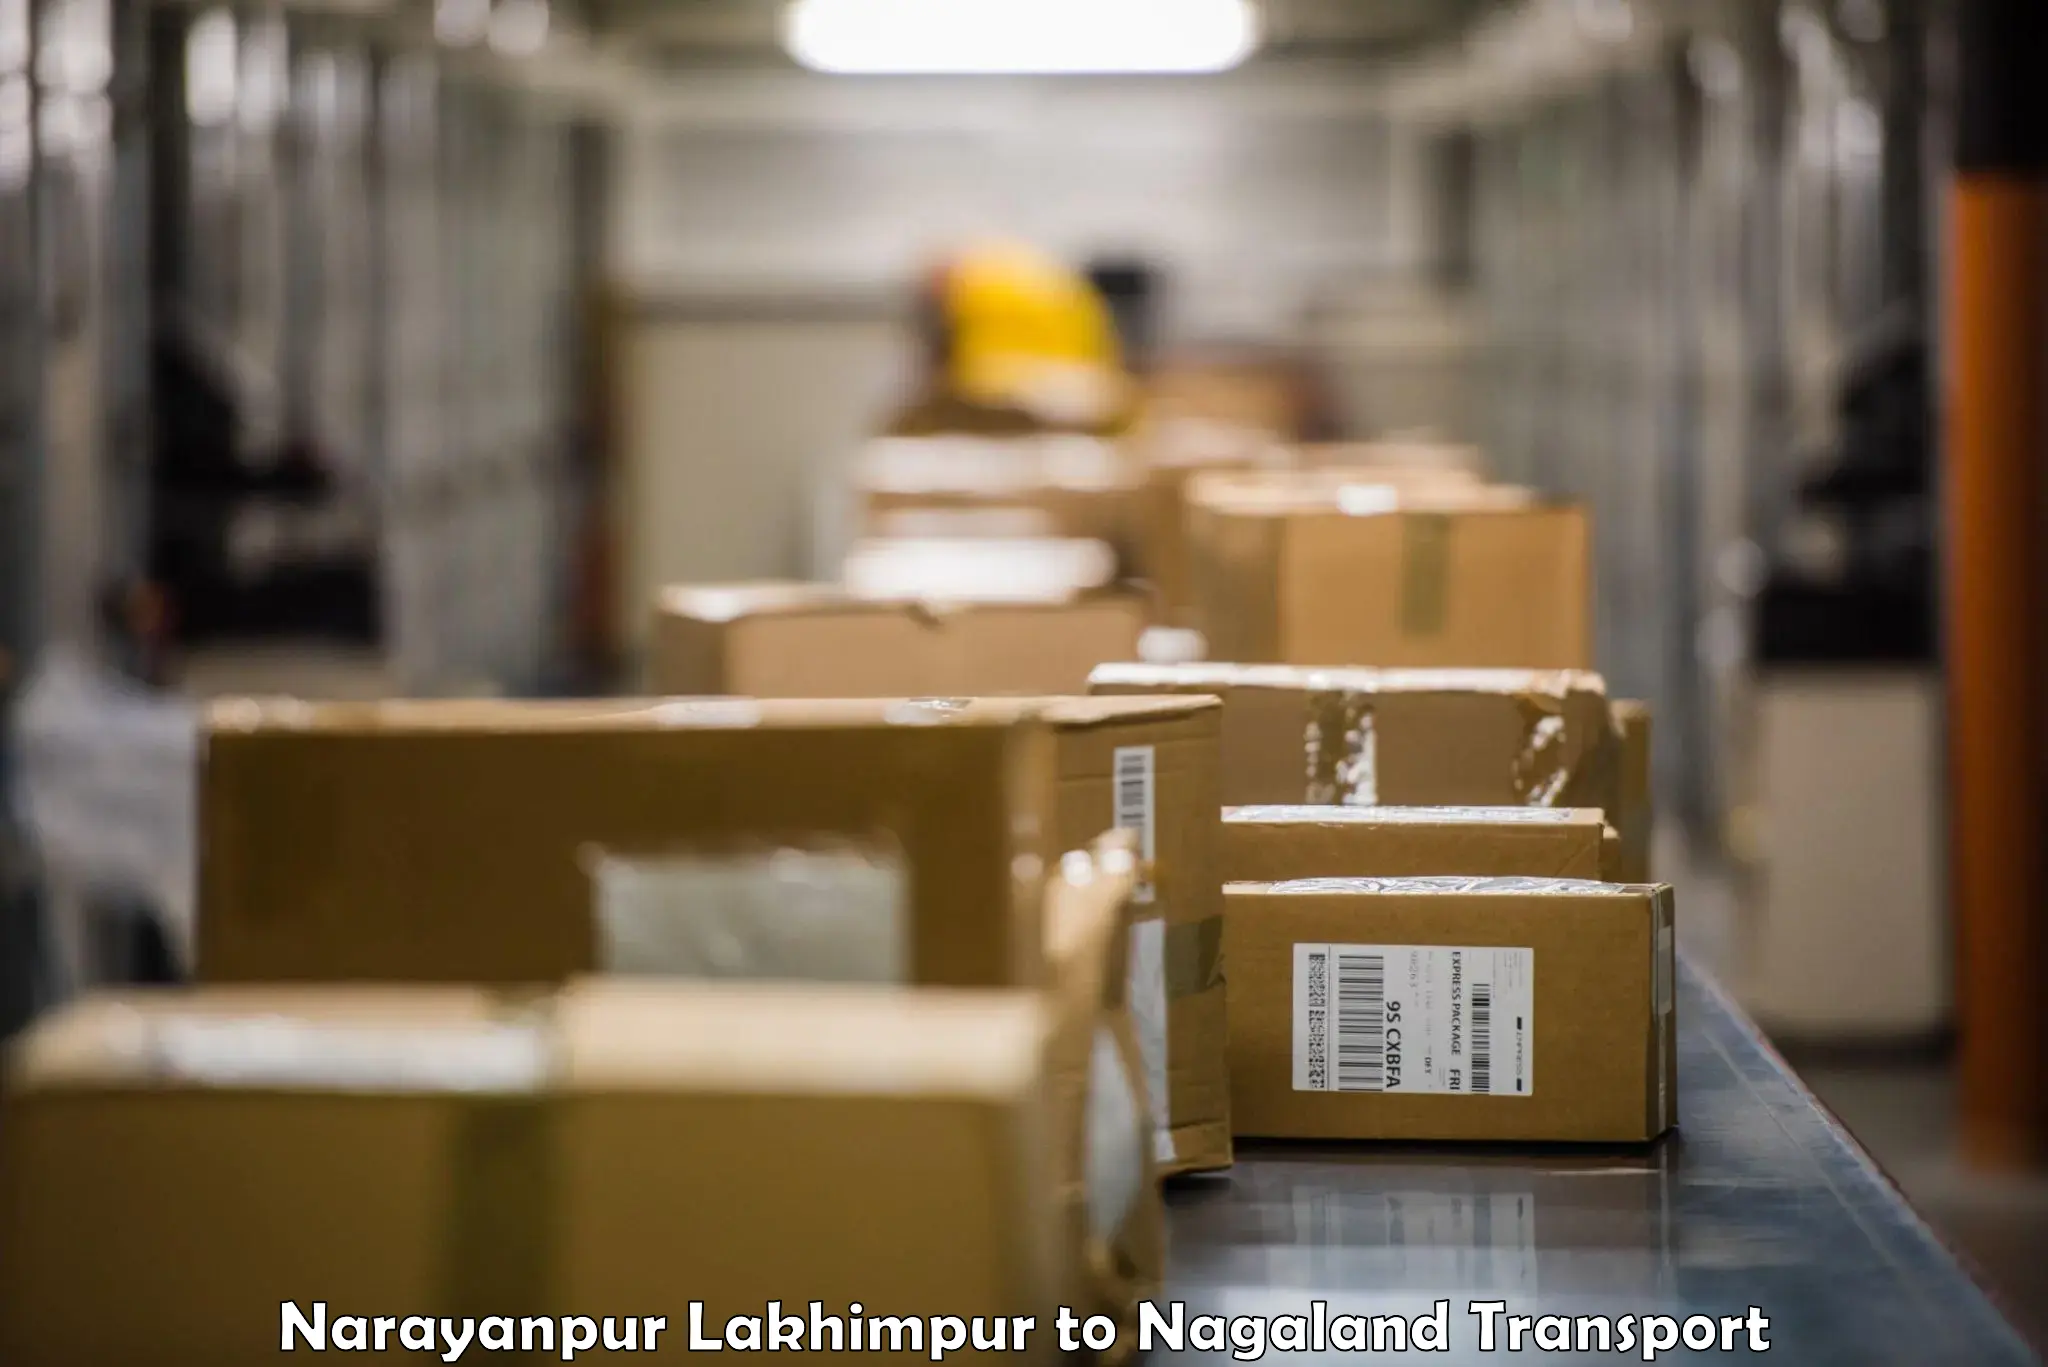 Domestic goods transportation services in Narayanpur Lakhimpur to Dimapur